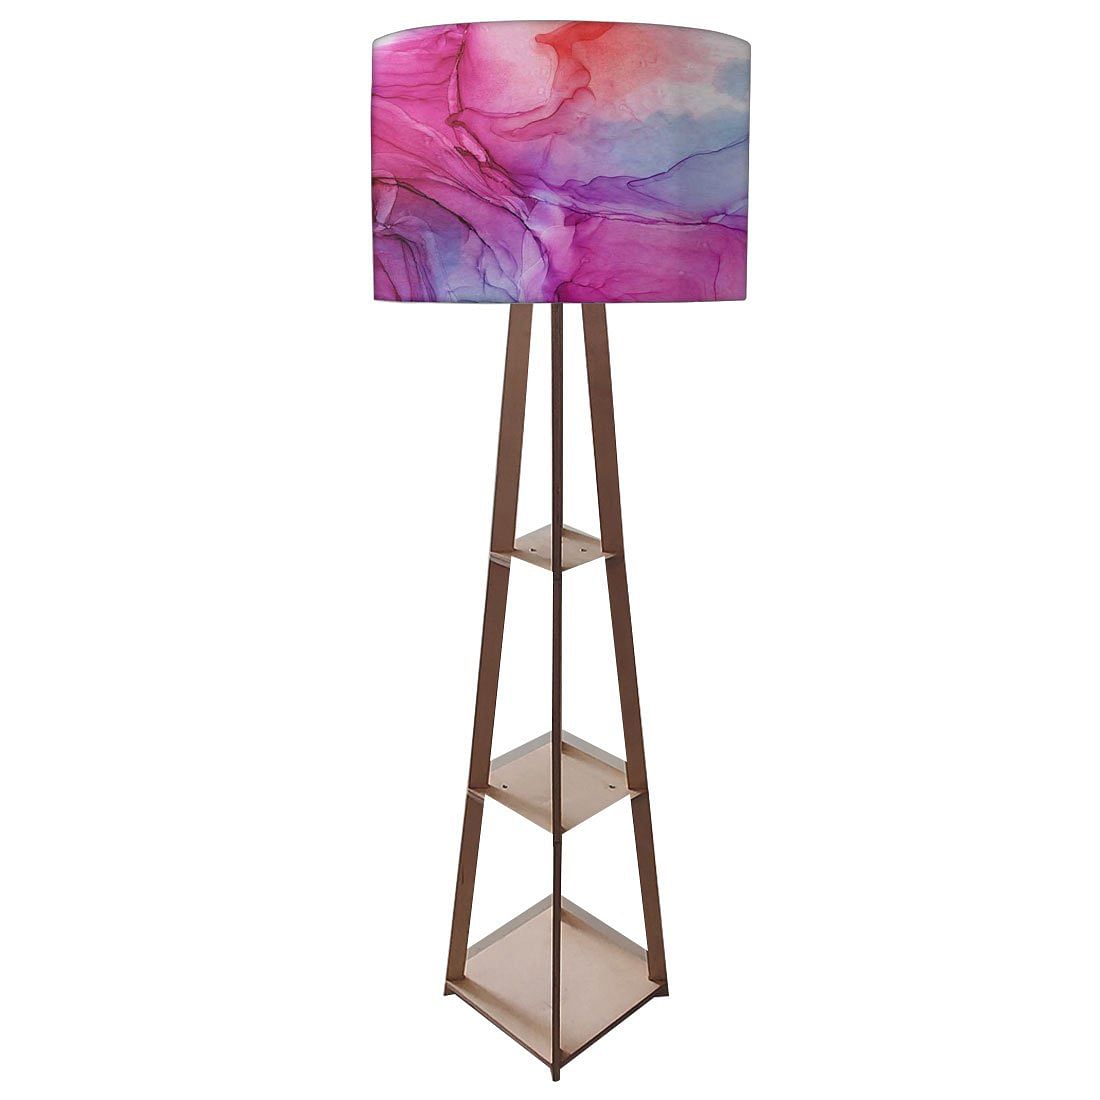 Wooden Corner Lamps with Shelves for Bedroom -  Watercolor Nutcase